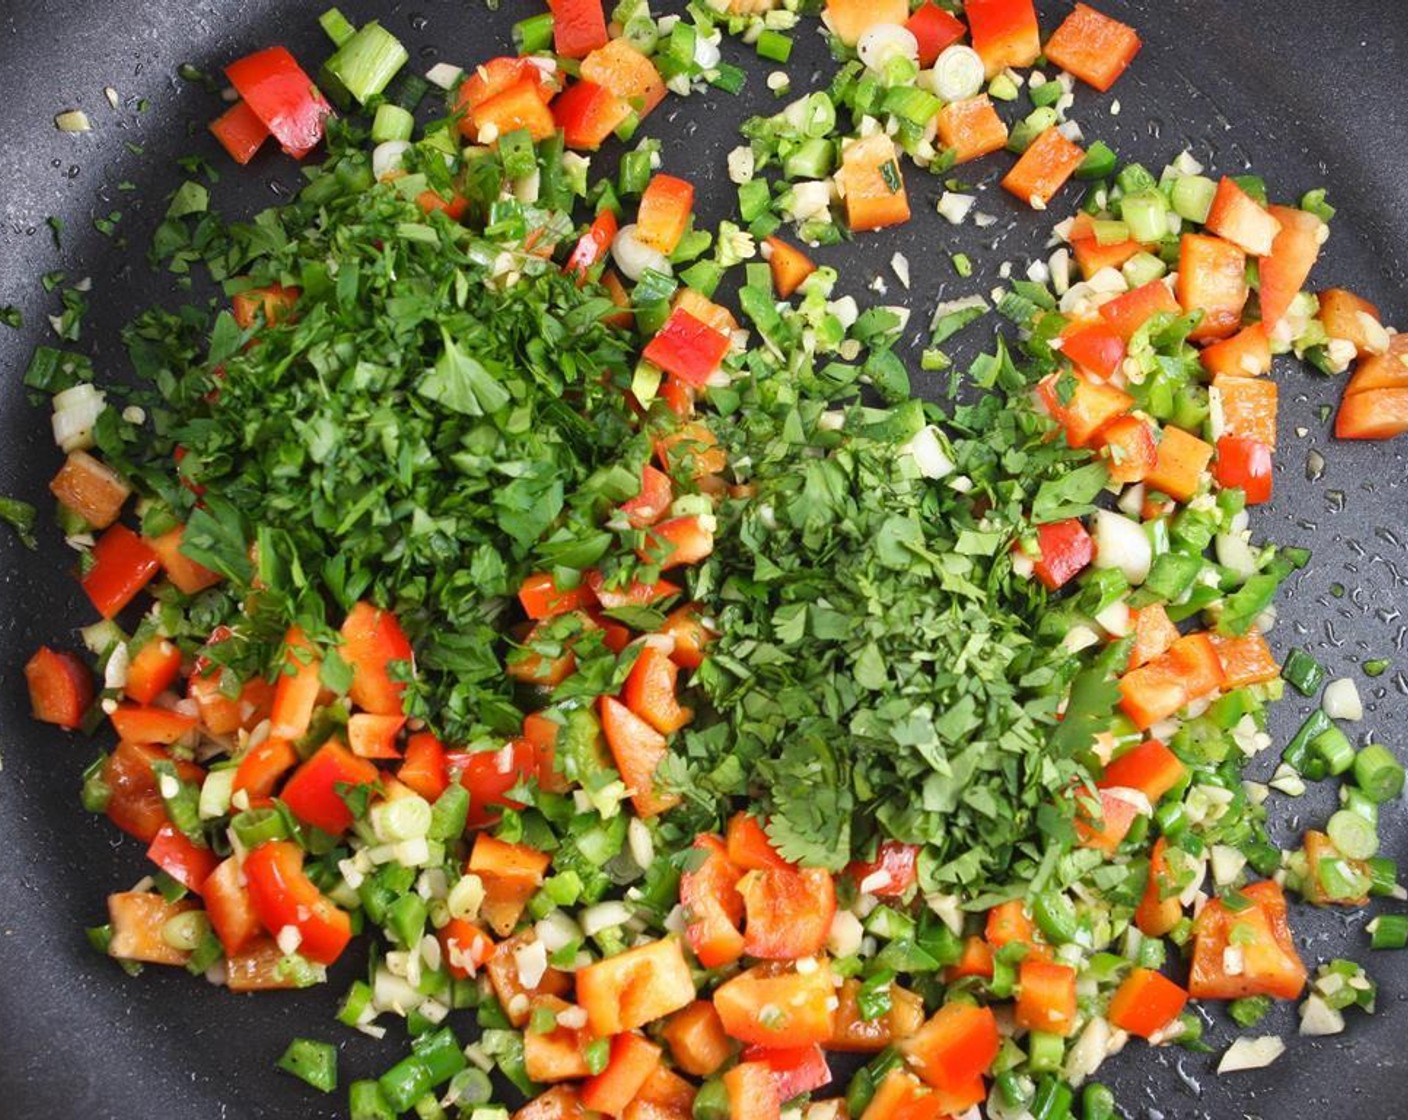 step 2 Add Italian Flat-Leaf Parsley (1/4 cup) and Fresh Cilantro (1/4 cup). Cook for an additional 2 minutes.